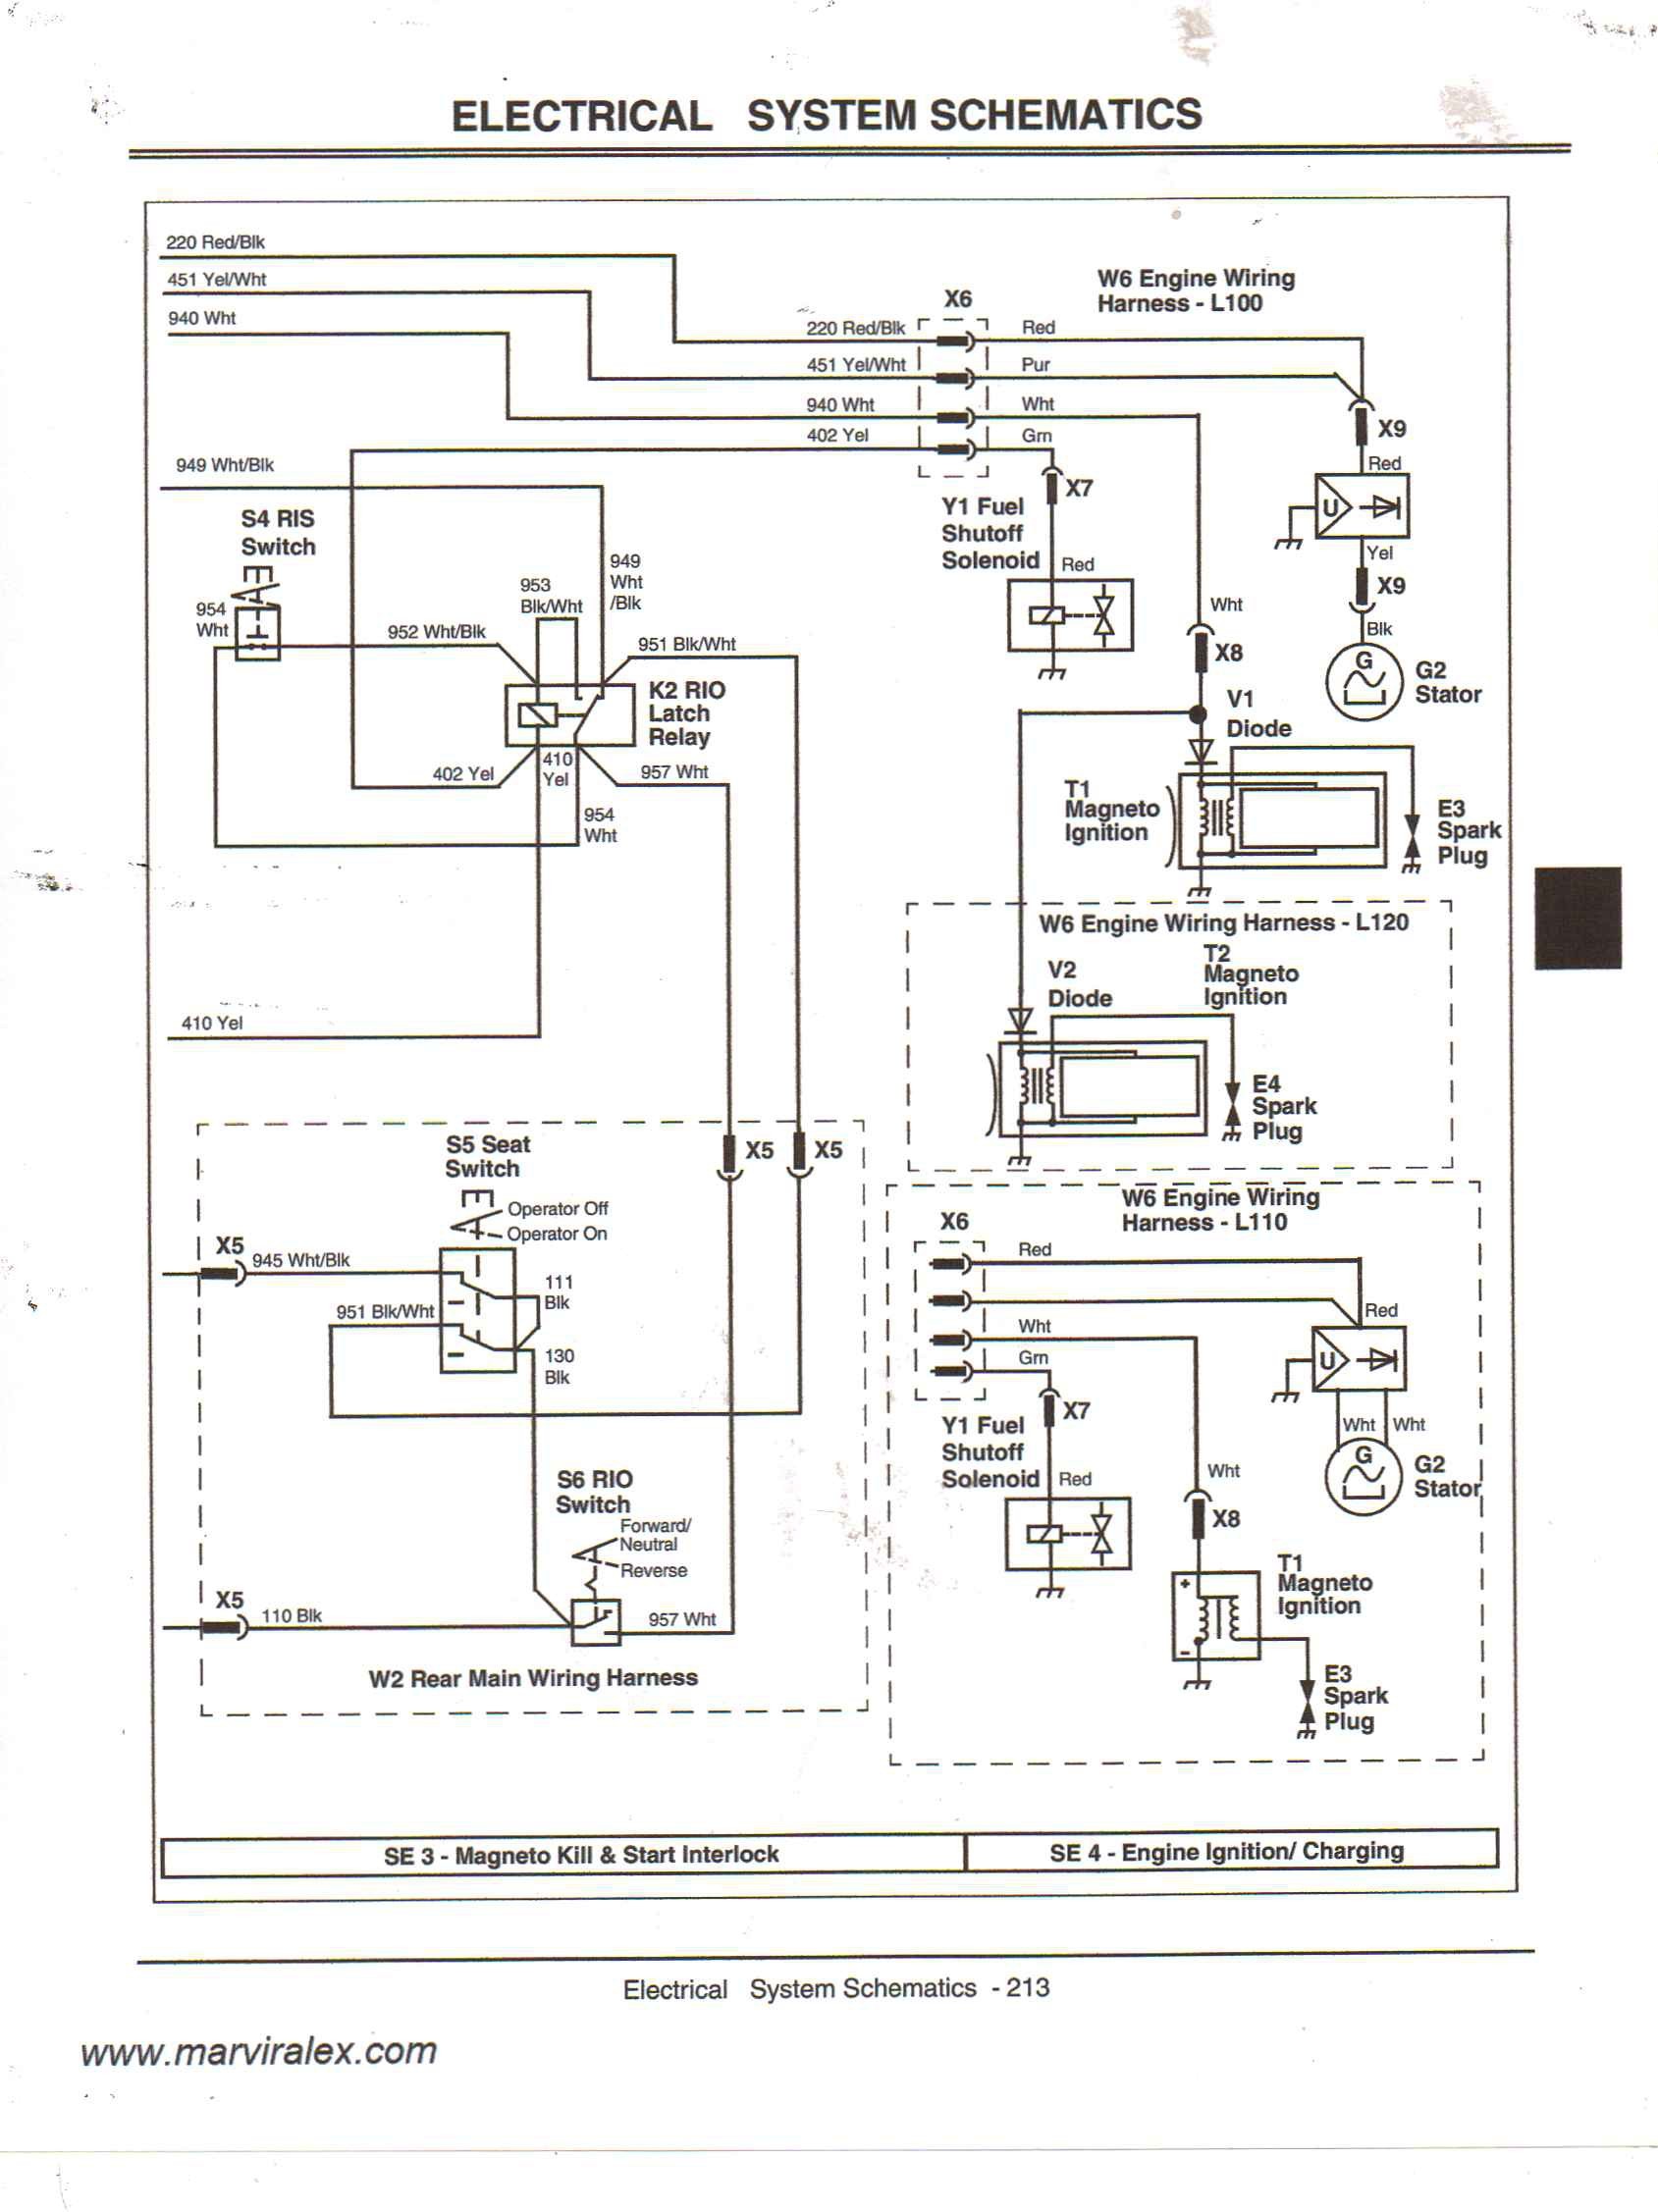 Extension Cord Wiring Diagram Fresh Electrical Wiring John Deere Gator Hpx Wiring Diagram Electrical